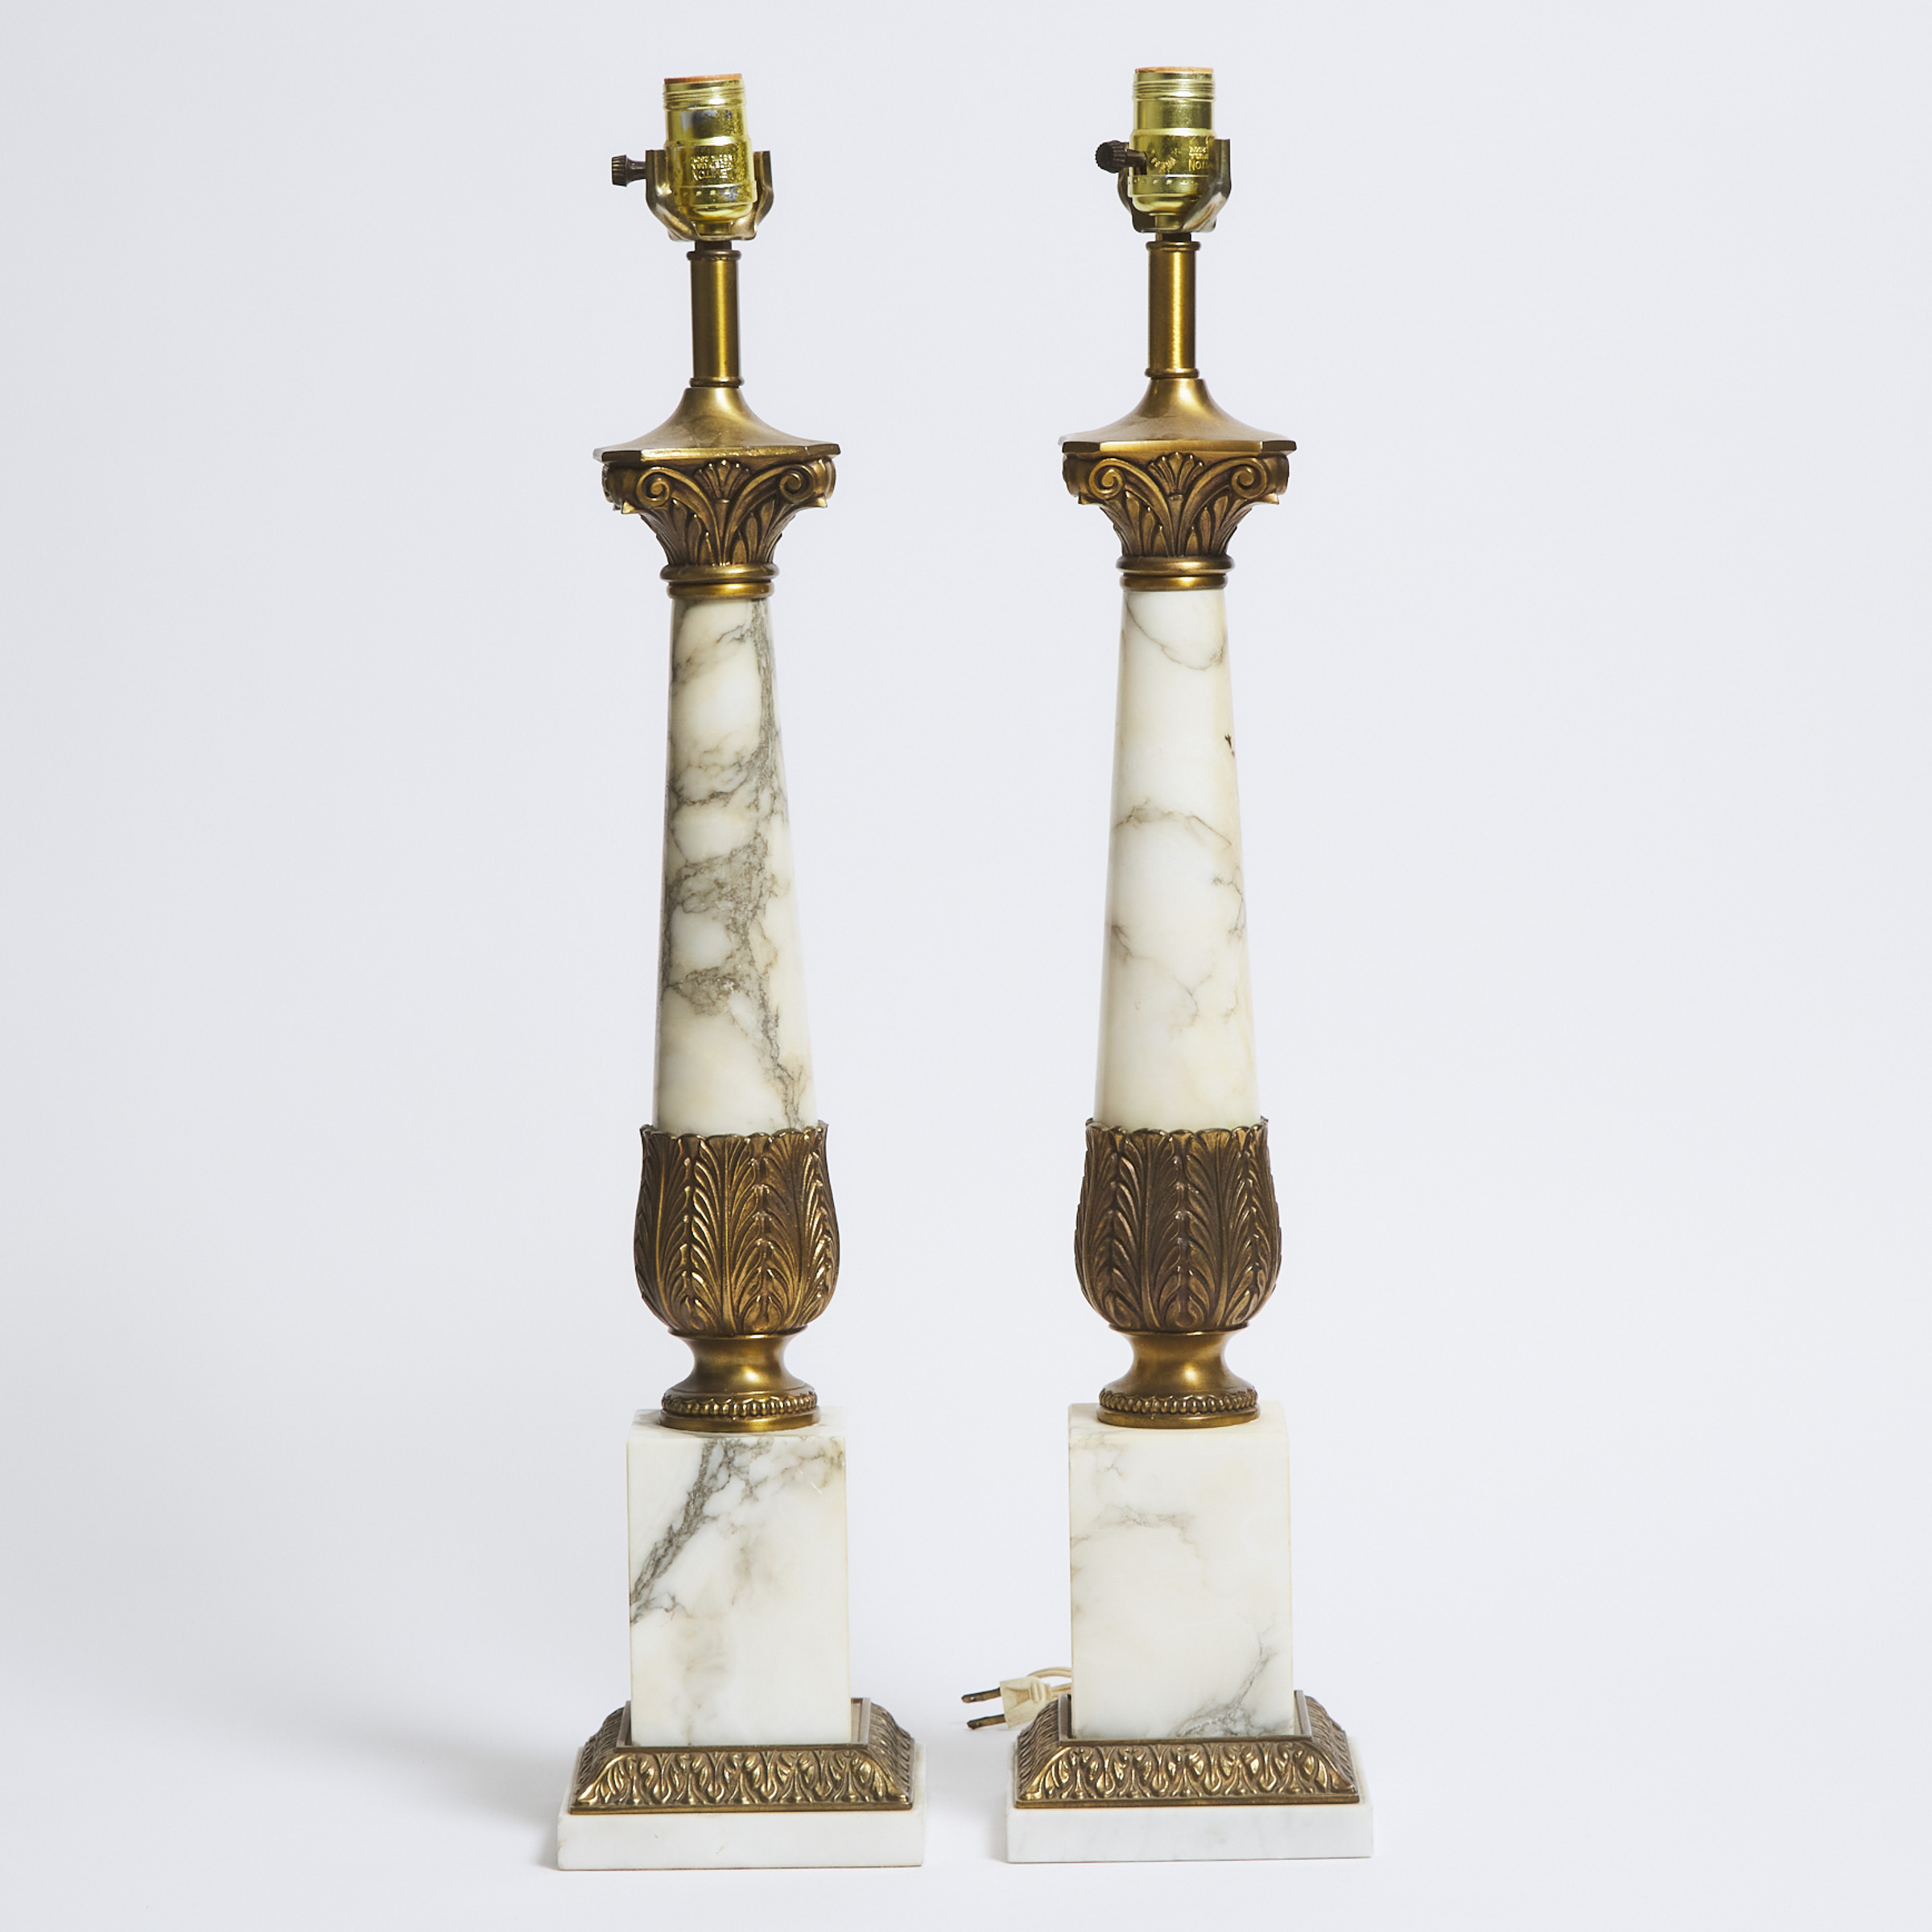 Pair of Gilt Bronze and Marble Column Form Table Lamps, mid 20th century